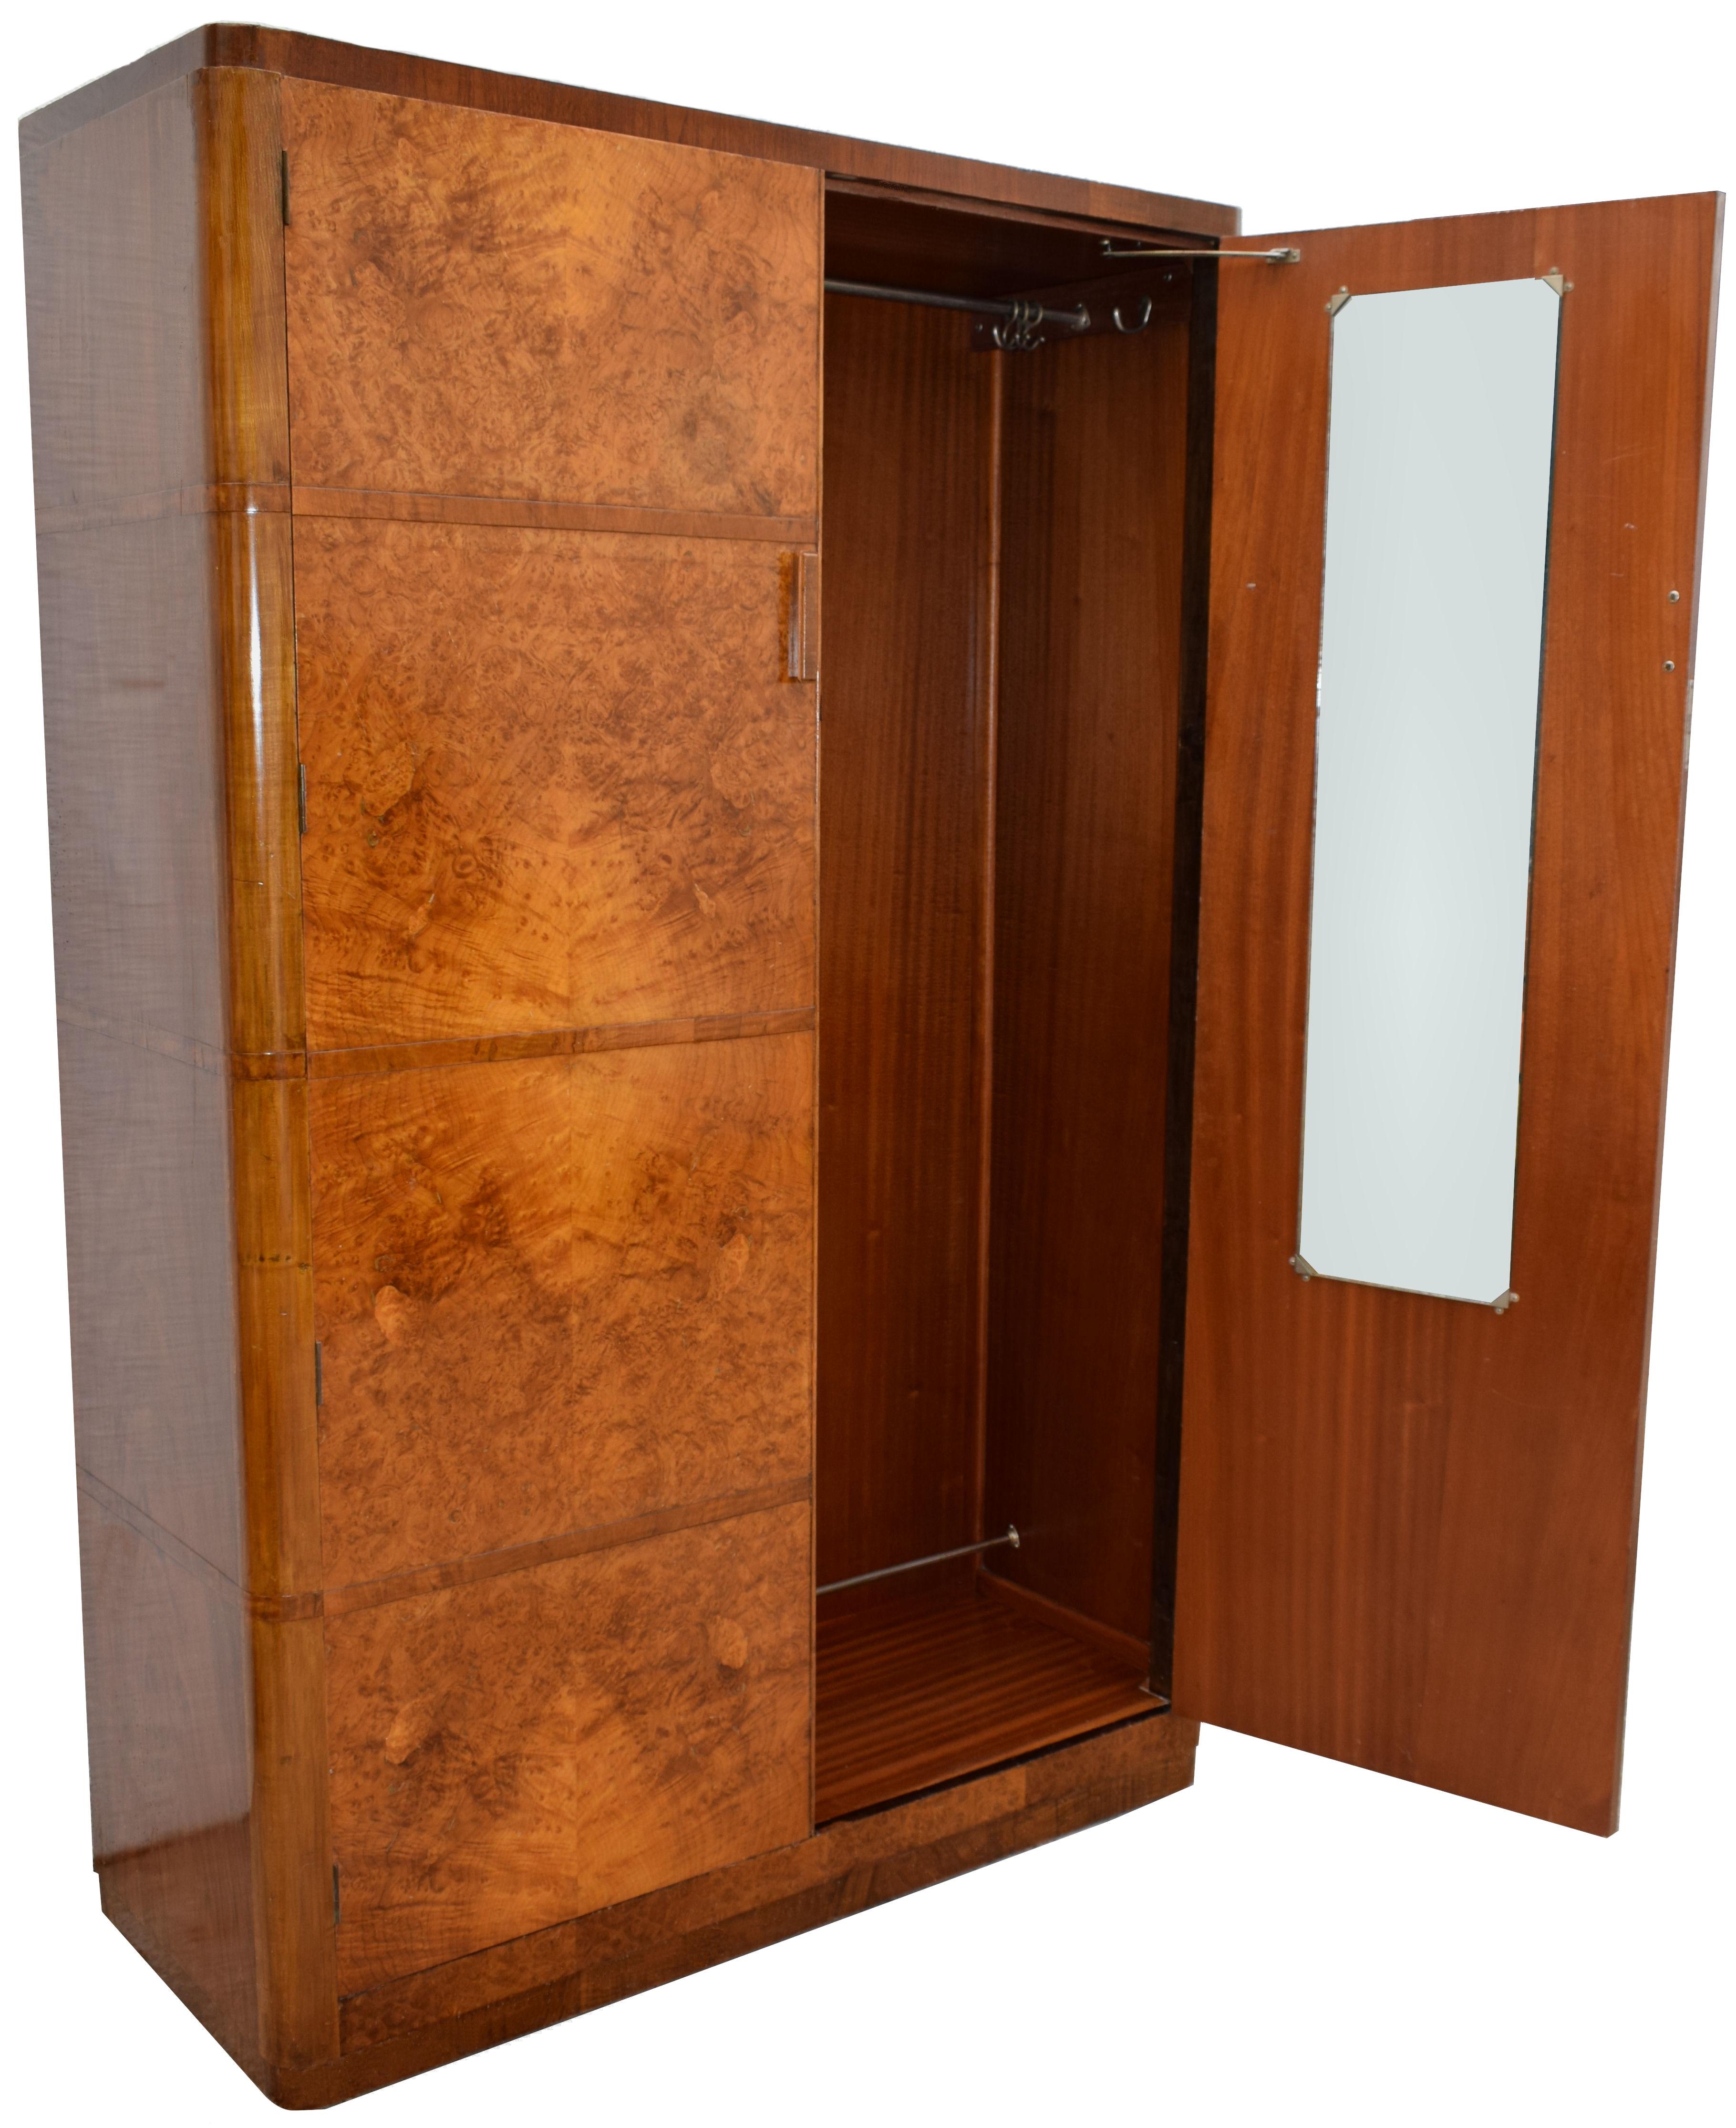 Beautifully figured walnut double wardrobe. Not only does this wardrobe look impressive with its heavily figured veneers but it's extremely generous in the storage it provides. Offering full hanging area left and right side of the wardrobe. All the